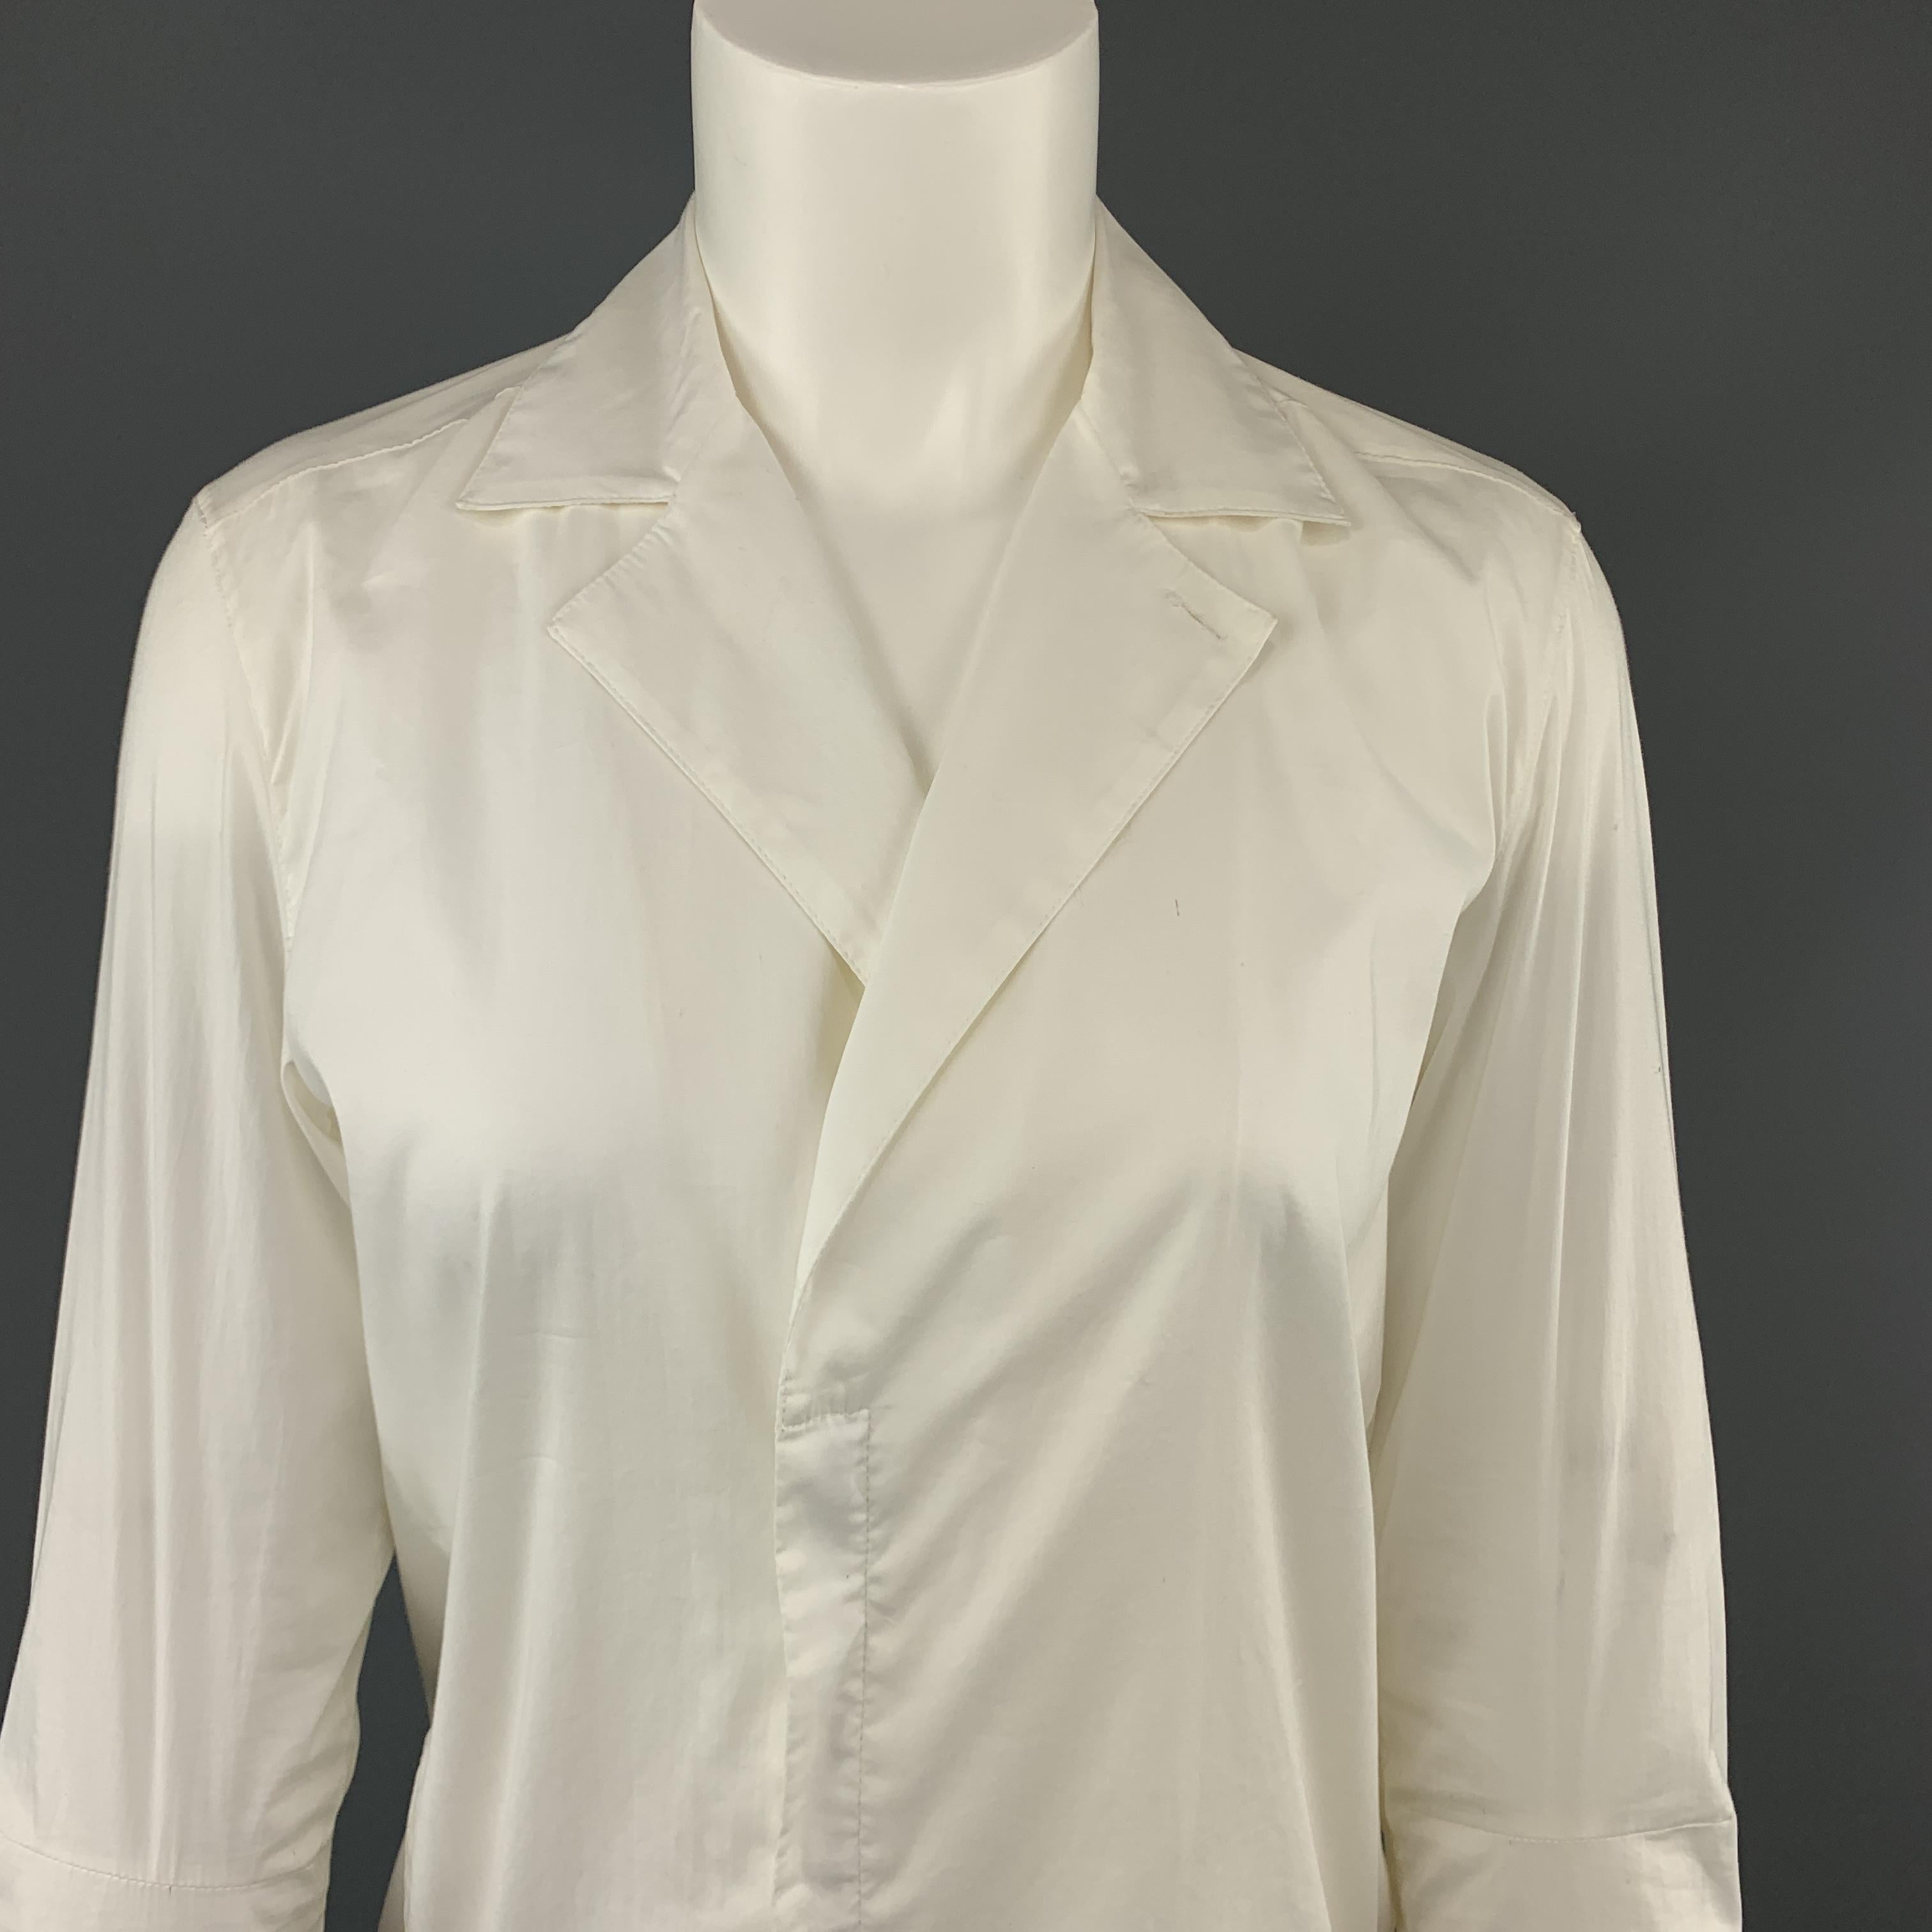 HELMUT LANG shirt dress comes in white stretch cotton with a pointed lapel, double breasted hidden placket zip closure, and high low hem. Wear throughout. As-is.
 
Good Pre-Owned Condition.
Marked: 4
 
Measurements:
 
Shoulder: 14 in.
Bust: 40